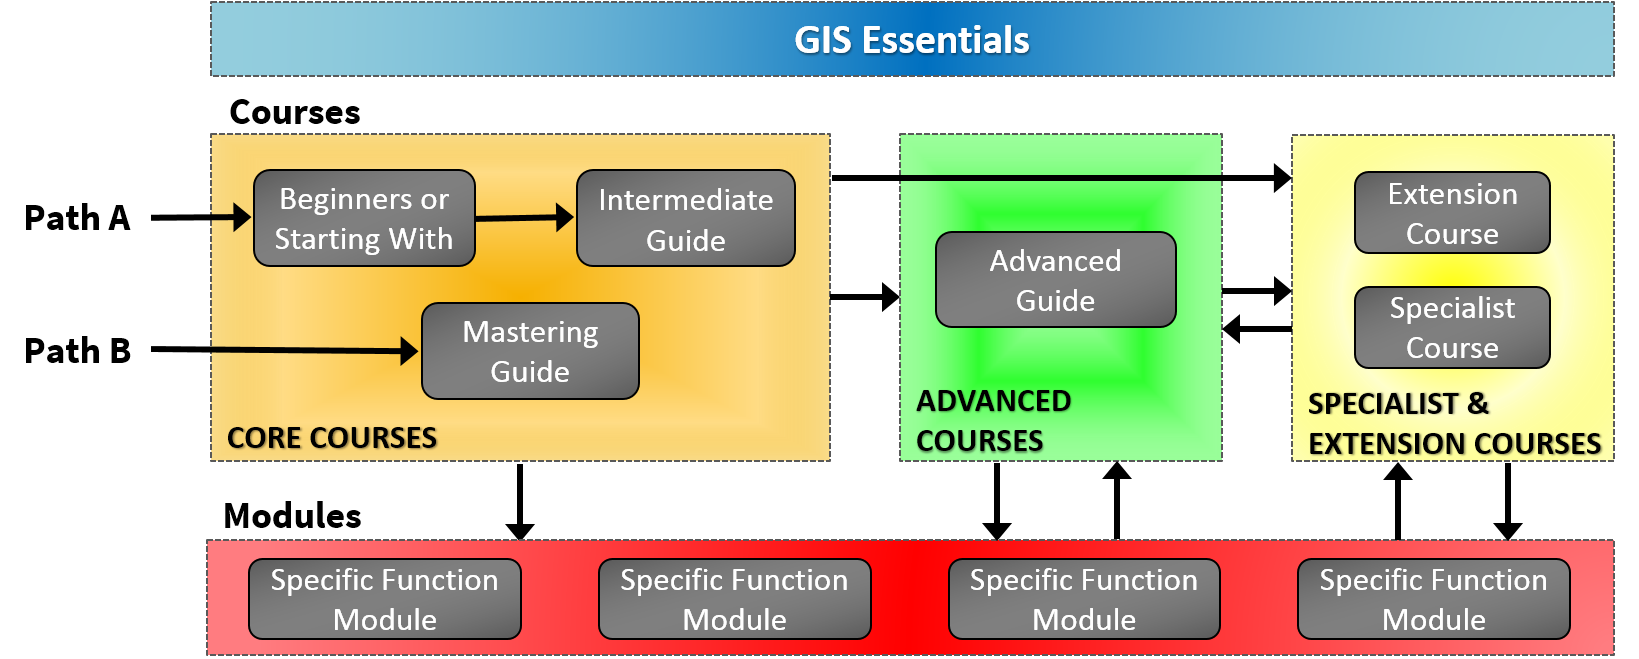 GIS Training Course Guidance for GIS247 Users